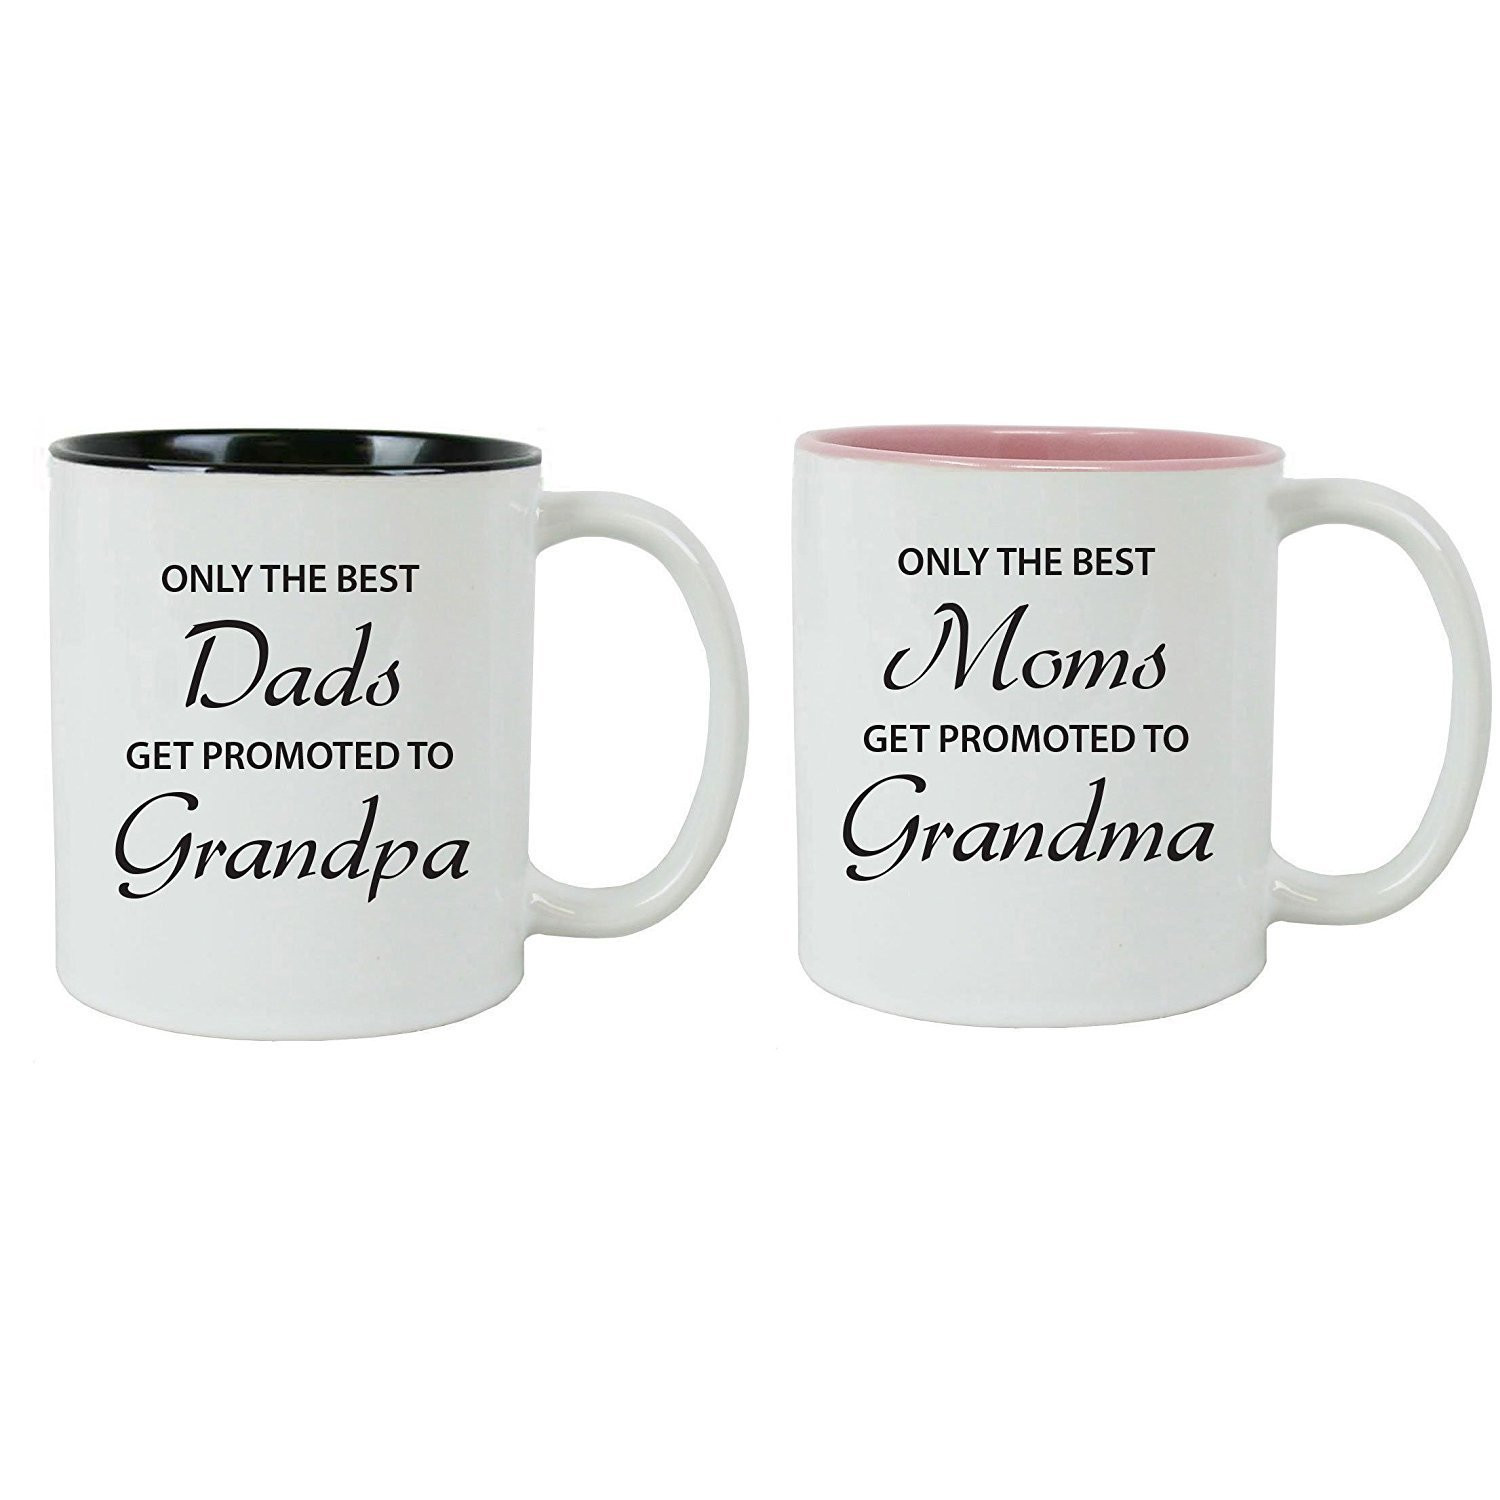 Gift Ideas For New Grandmothers
 Best Gifts For Grandparents Reviews of 2019 at TopProducts